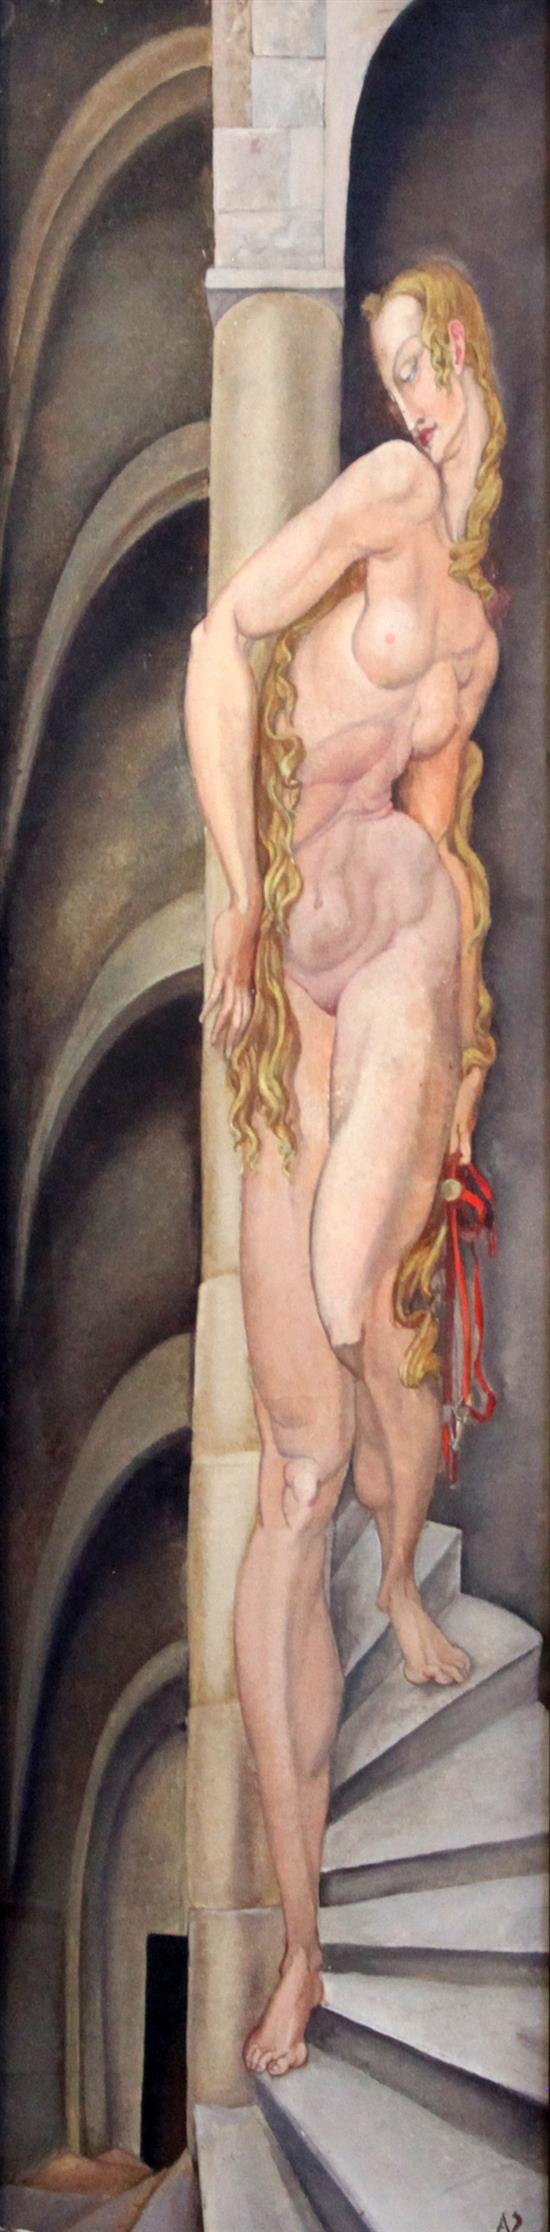 Albert Victor Ormsby Wood (1904-1977) Nude on a spiral staircase 27 x 6.75in.